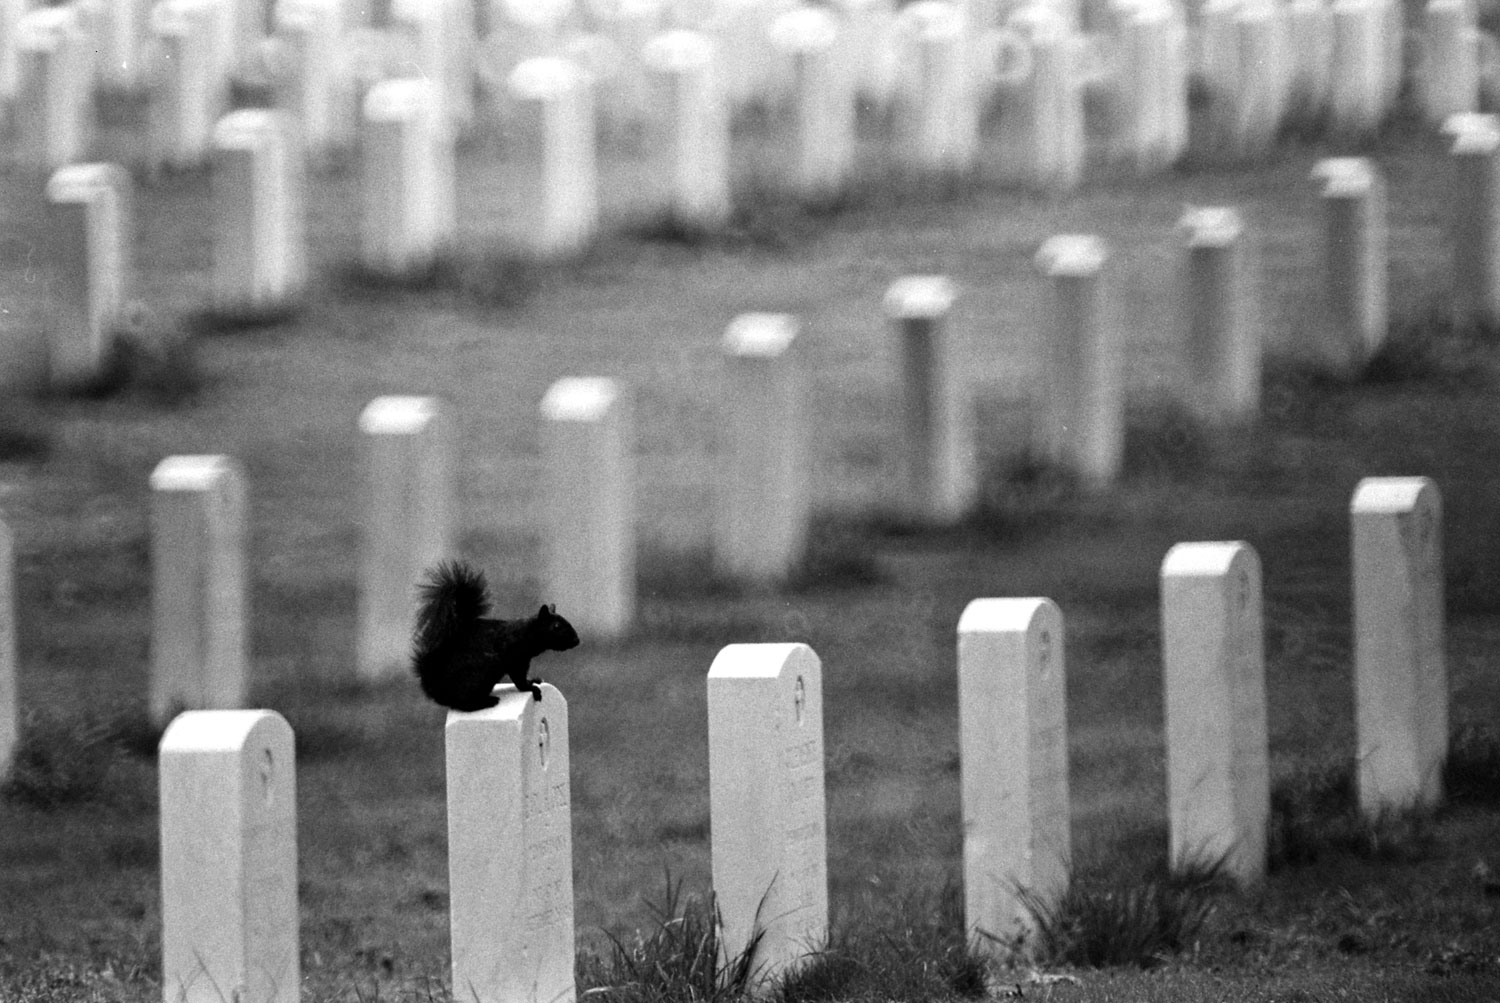 A resident squirrel perches on a headstone at Arlington National Cemetery, 1965.